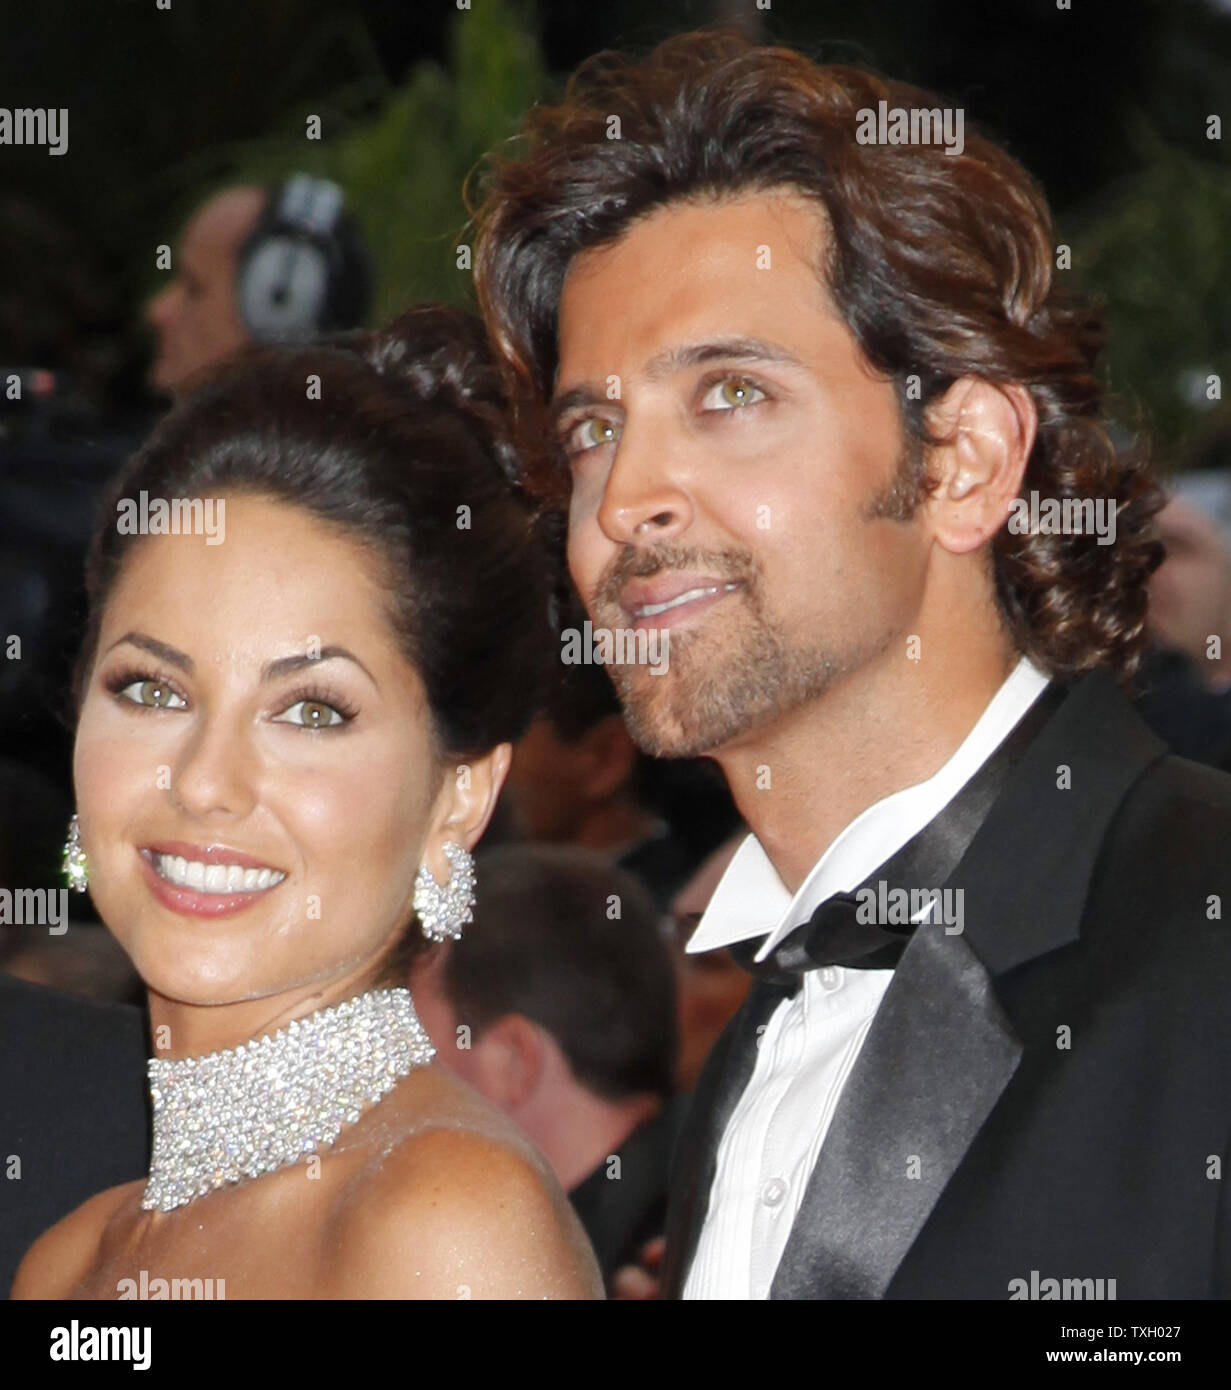 Actress Barbara Mori Ochoa and Bollywood actor Hrithik Roshan arrive on the red carpet before a screening of the film 'Bright Star' at the 62nd annual Cannes Film Festival in Cannes, France on May 15, 2009.   (UPI Photo/David Silpa) Stock Photo